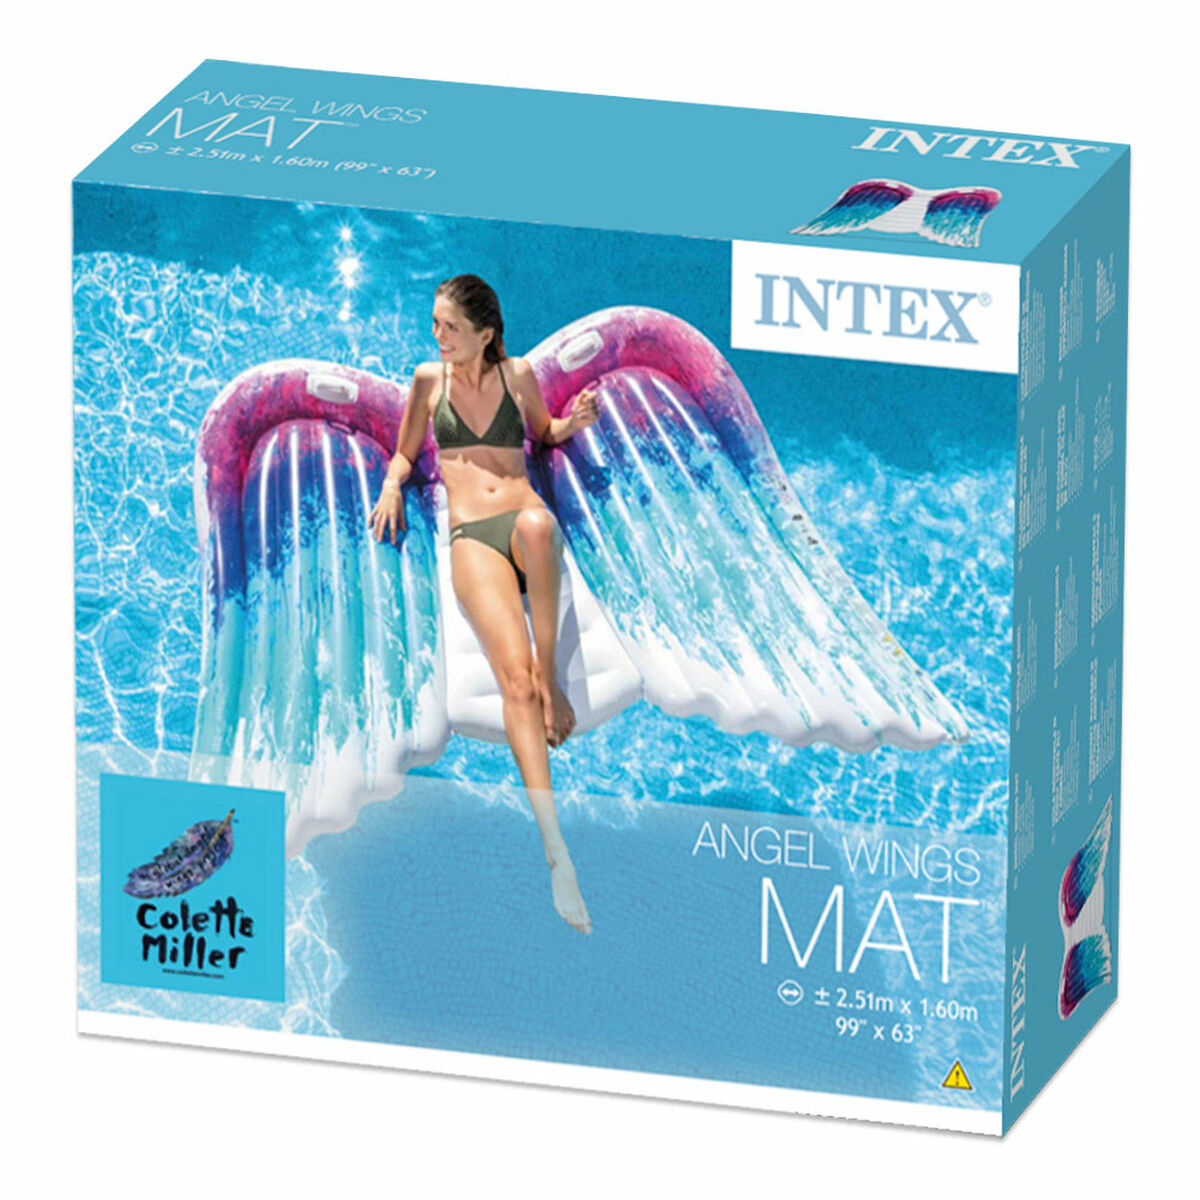 Air mattress Intex Colette Miller Angel Wings With handles 251 x 160 cm (4 Units)